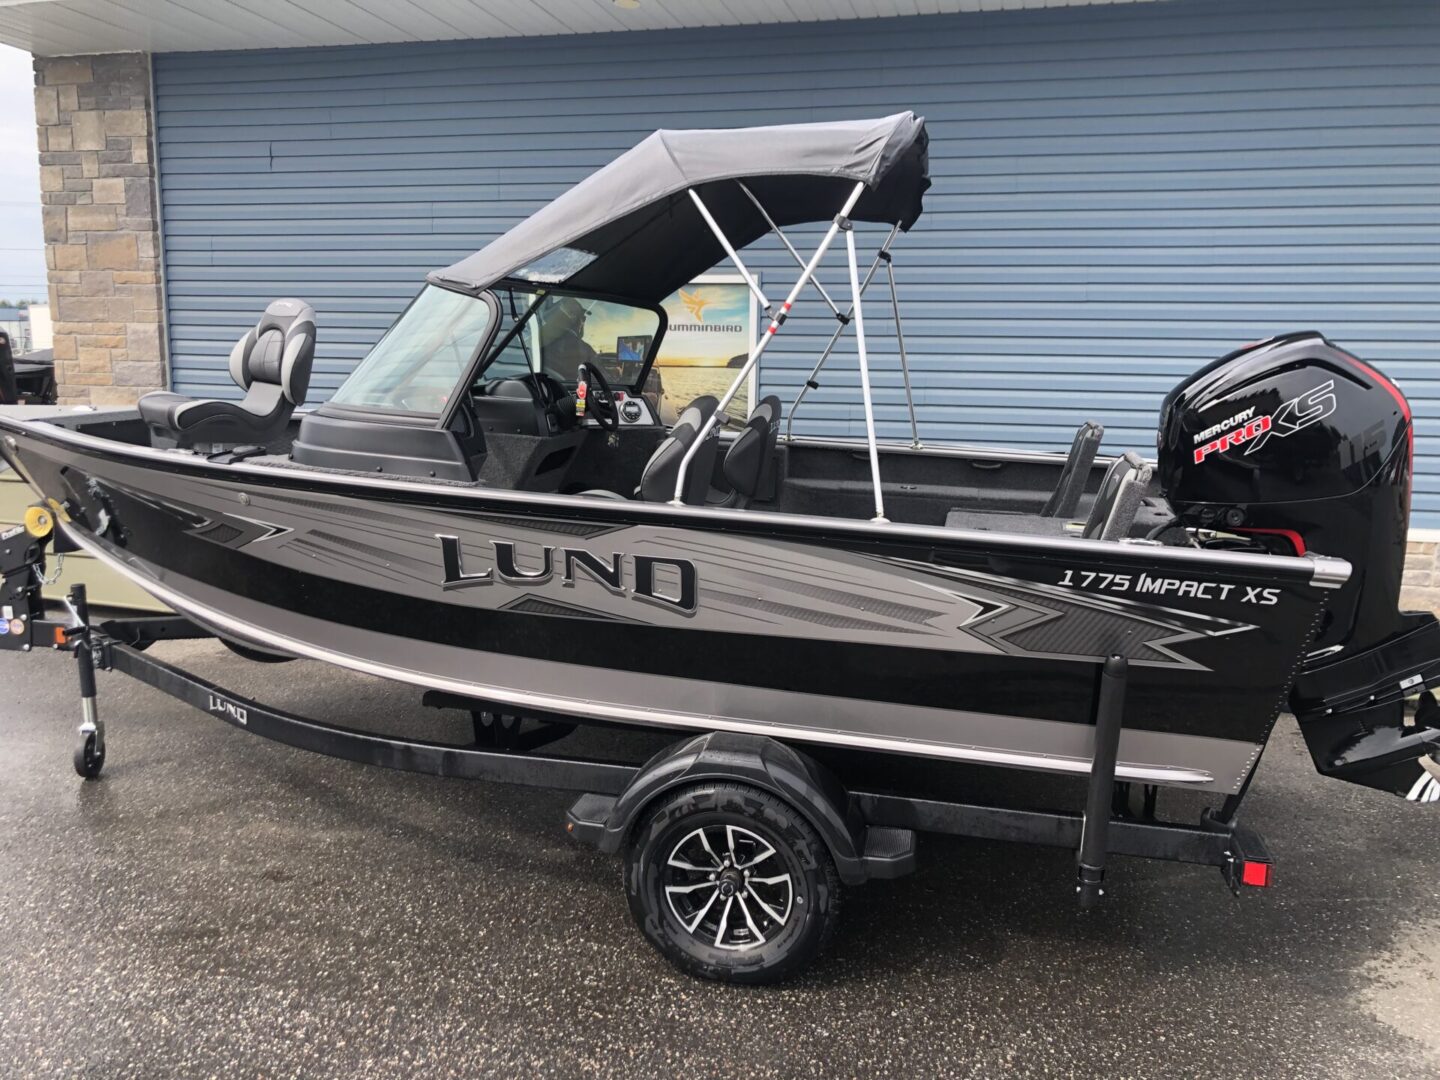 Lund gray and black boat with cover 2